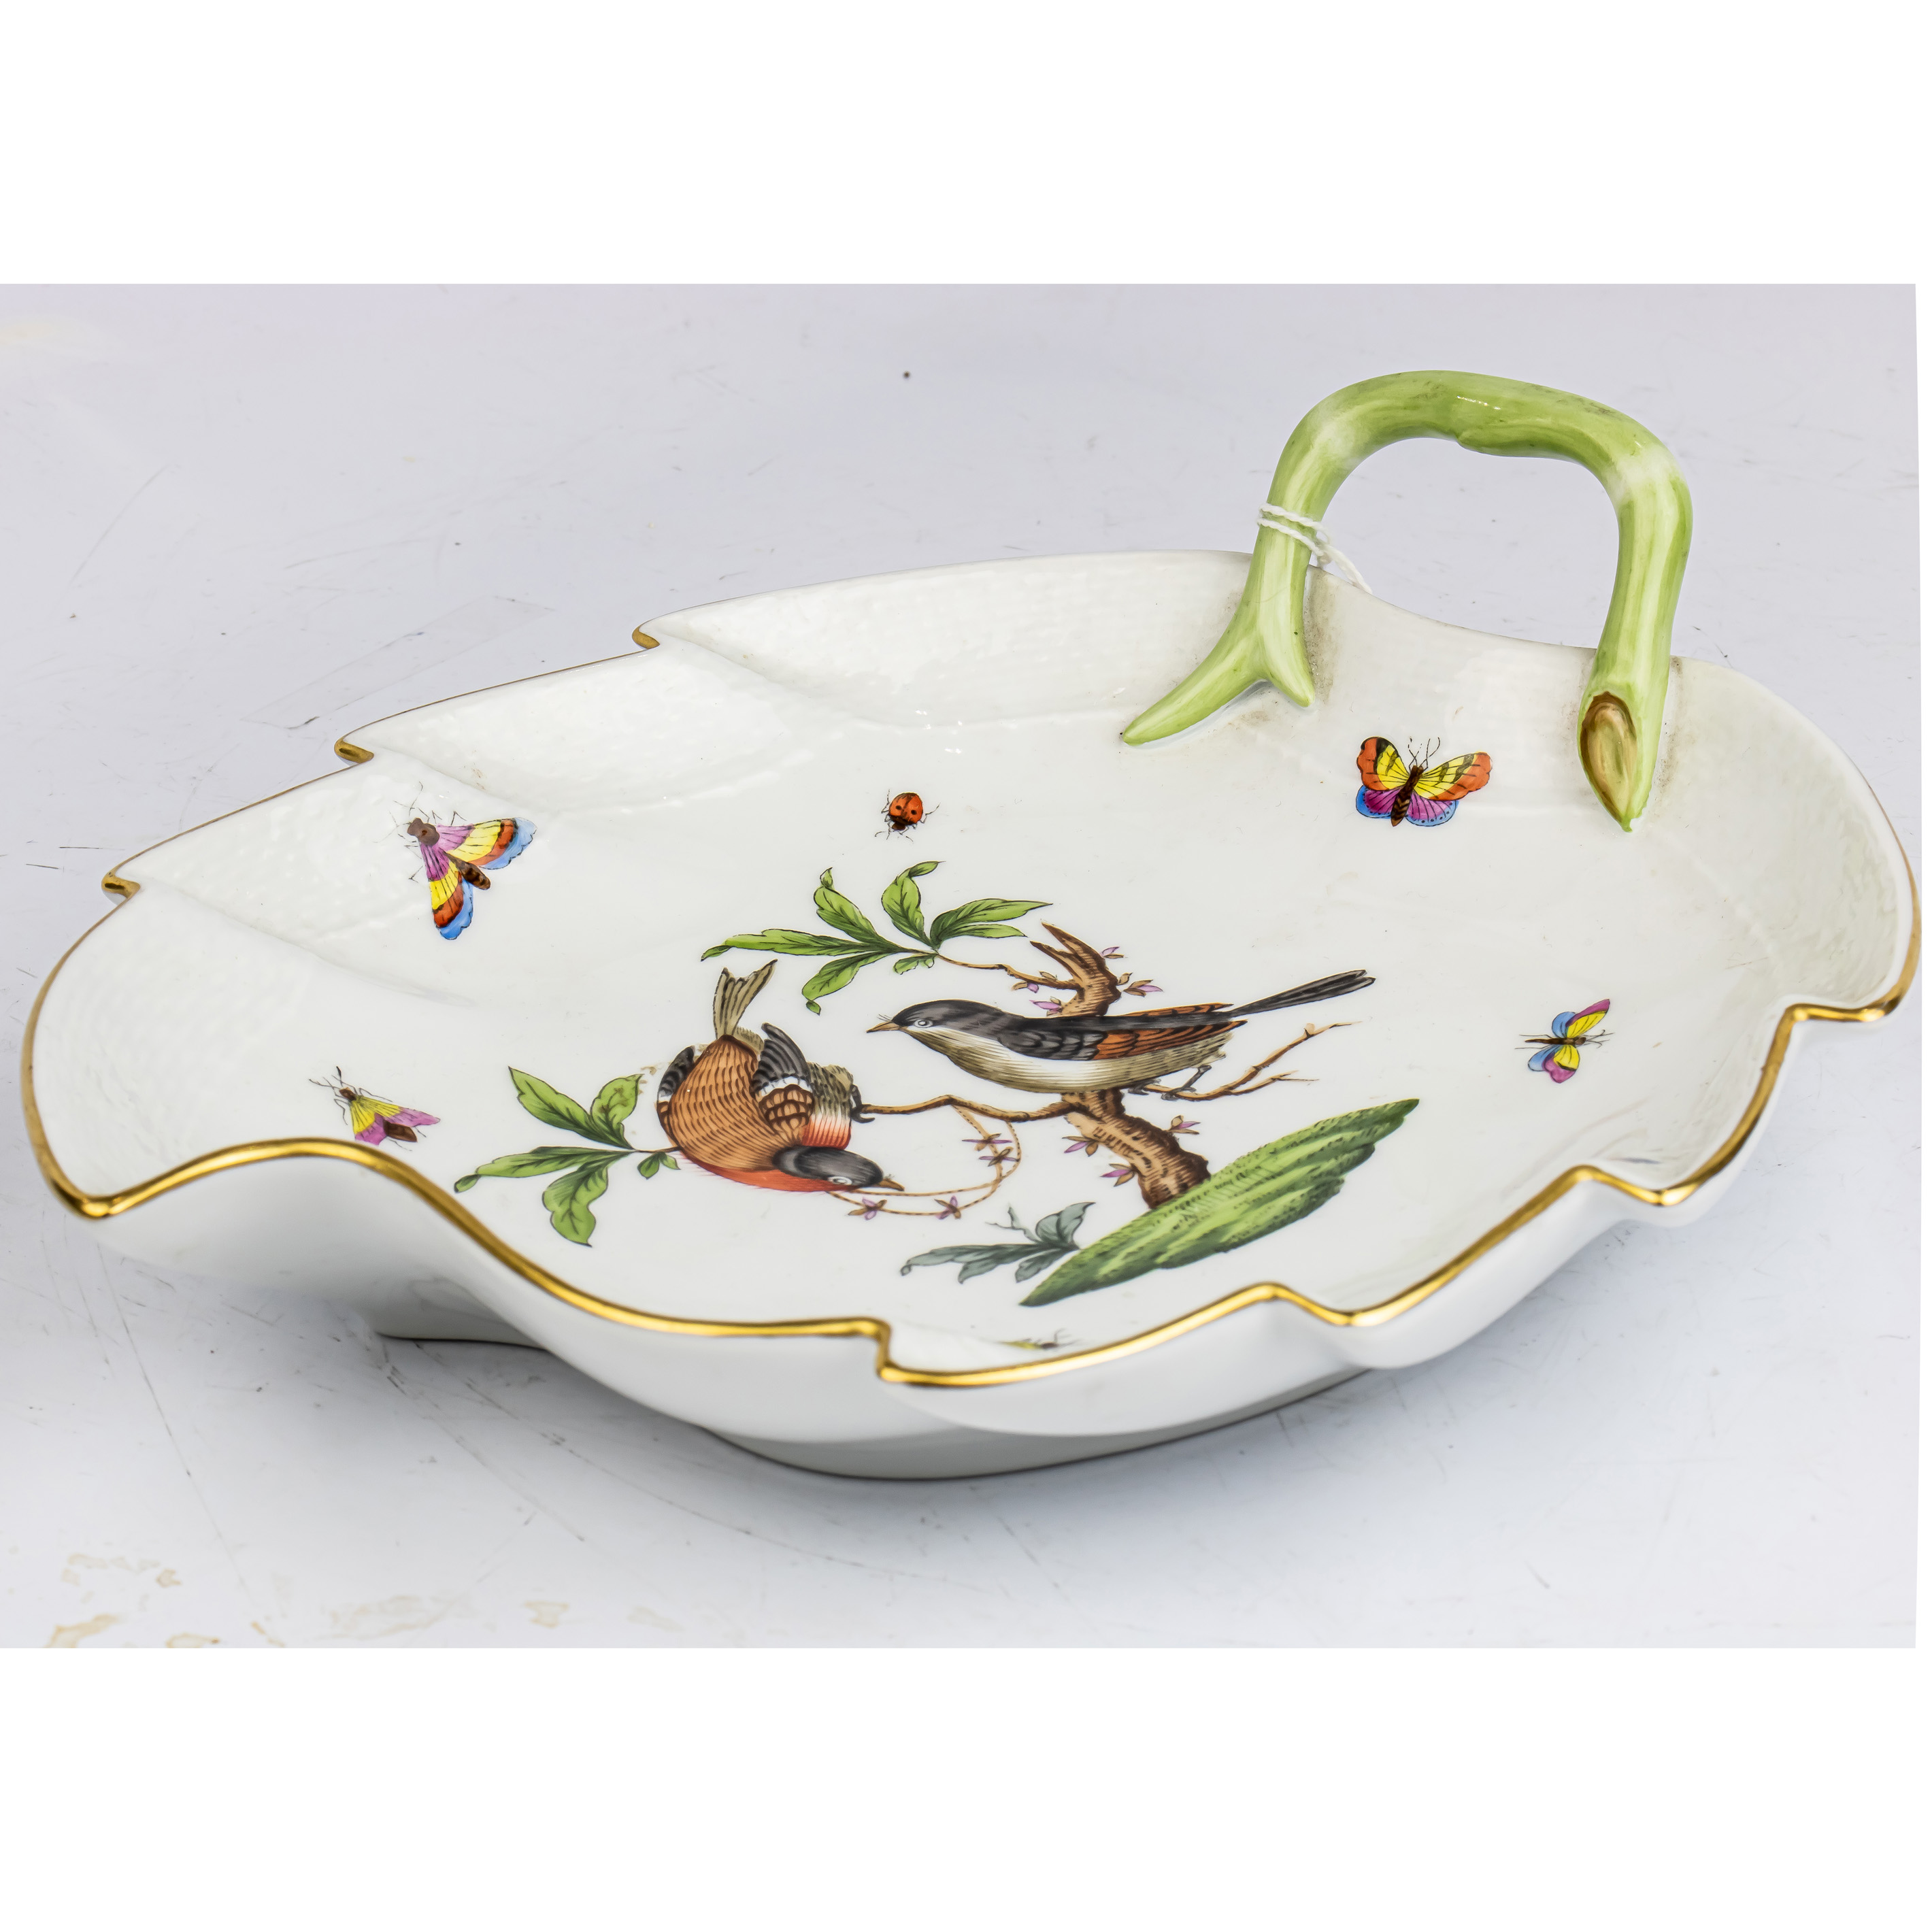 HEREND PORCELAIN LEAF DISH IN THE 3a3674